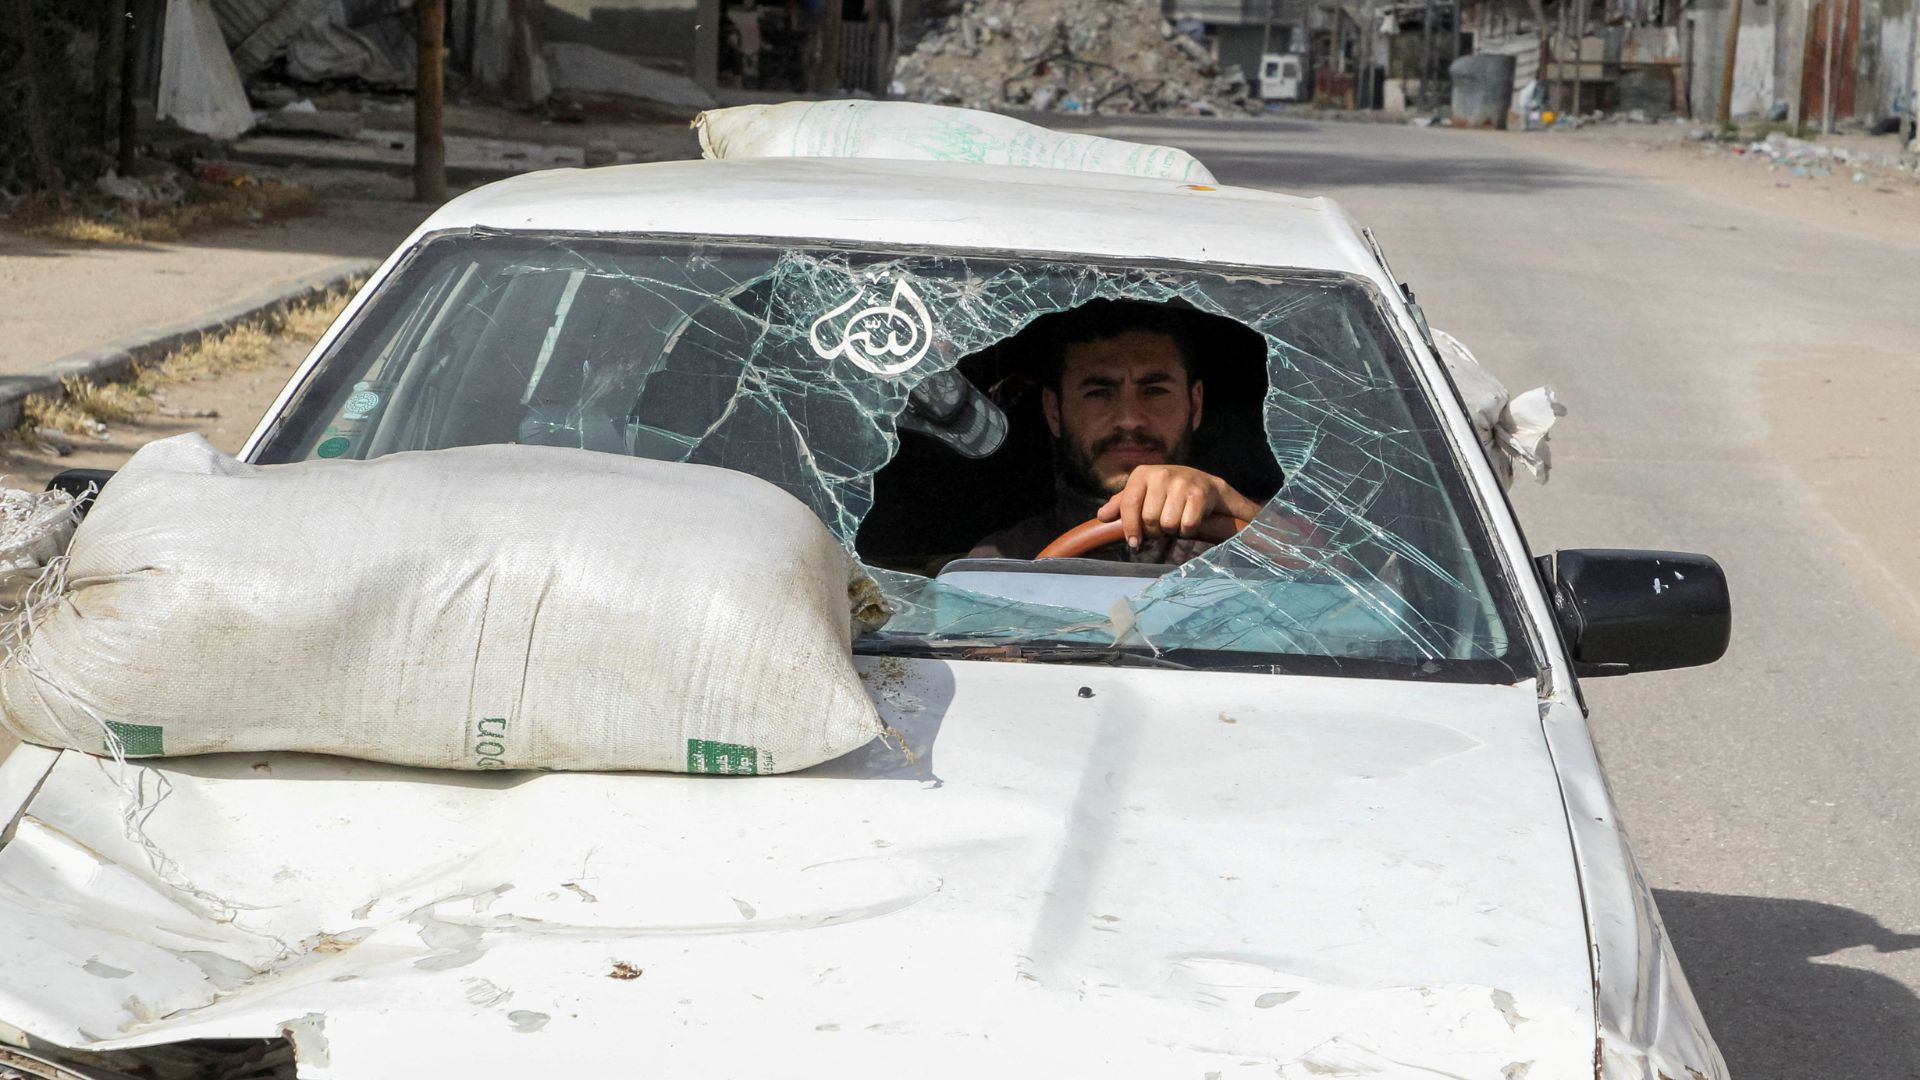 A displaced Palestinian man drives a car damaged during Israel's military offensive as he flees Rafah. /Hatem Khaled/Reuters
